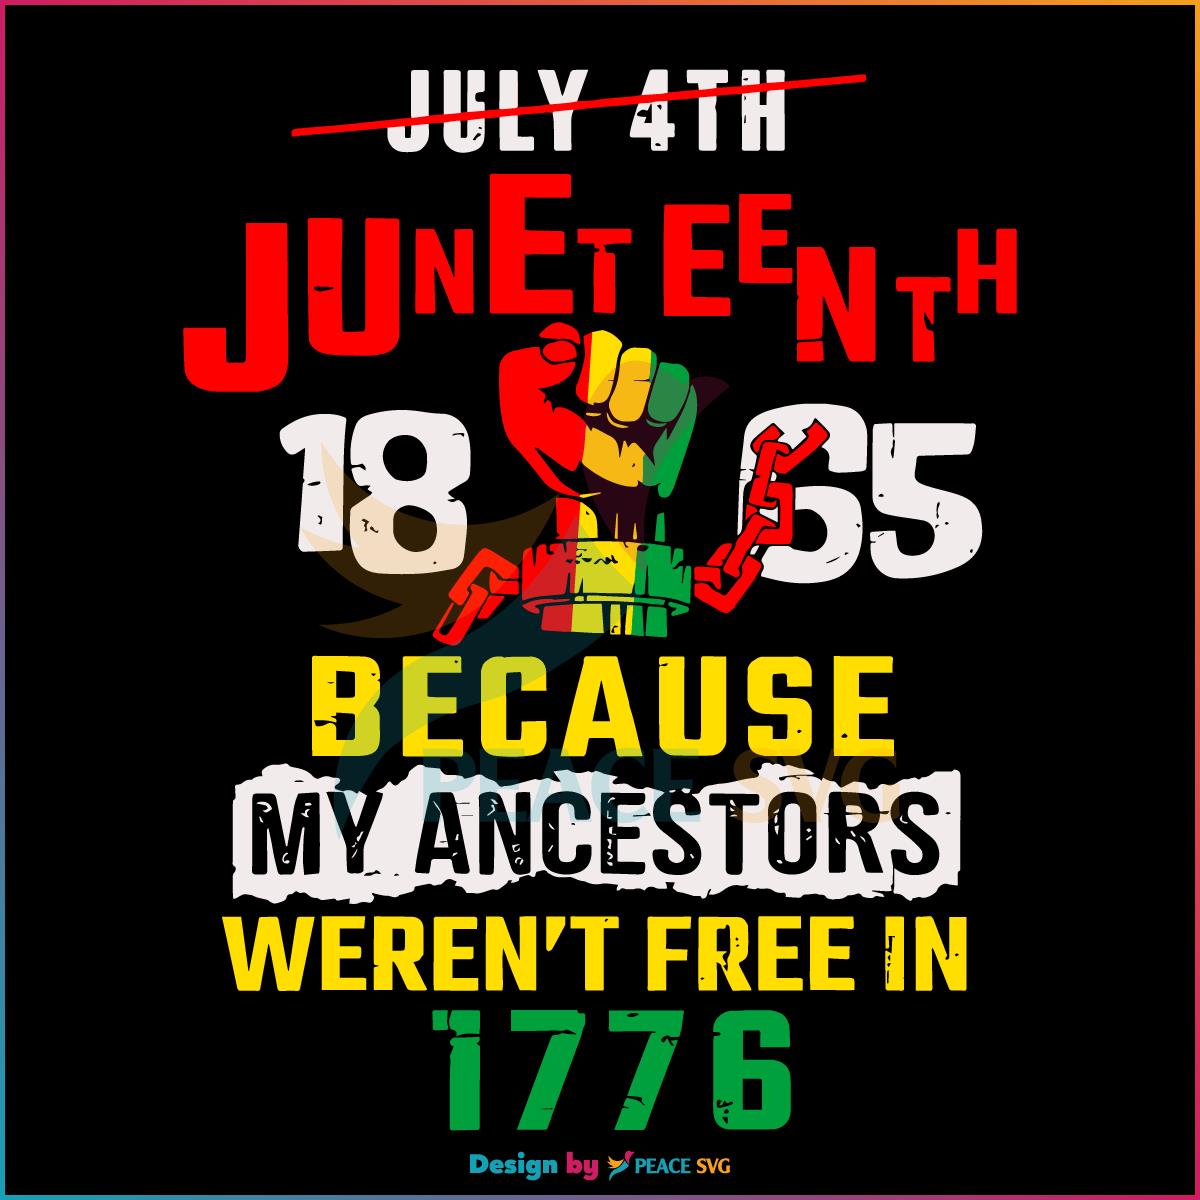 Free Juneteenth 1865 African American SVG Graphic Design Files » PeaceSVG